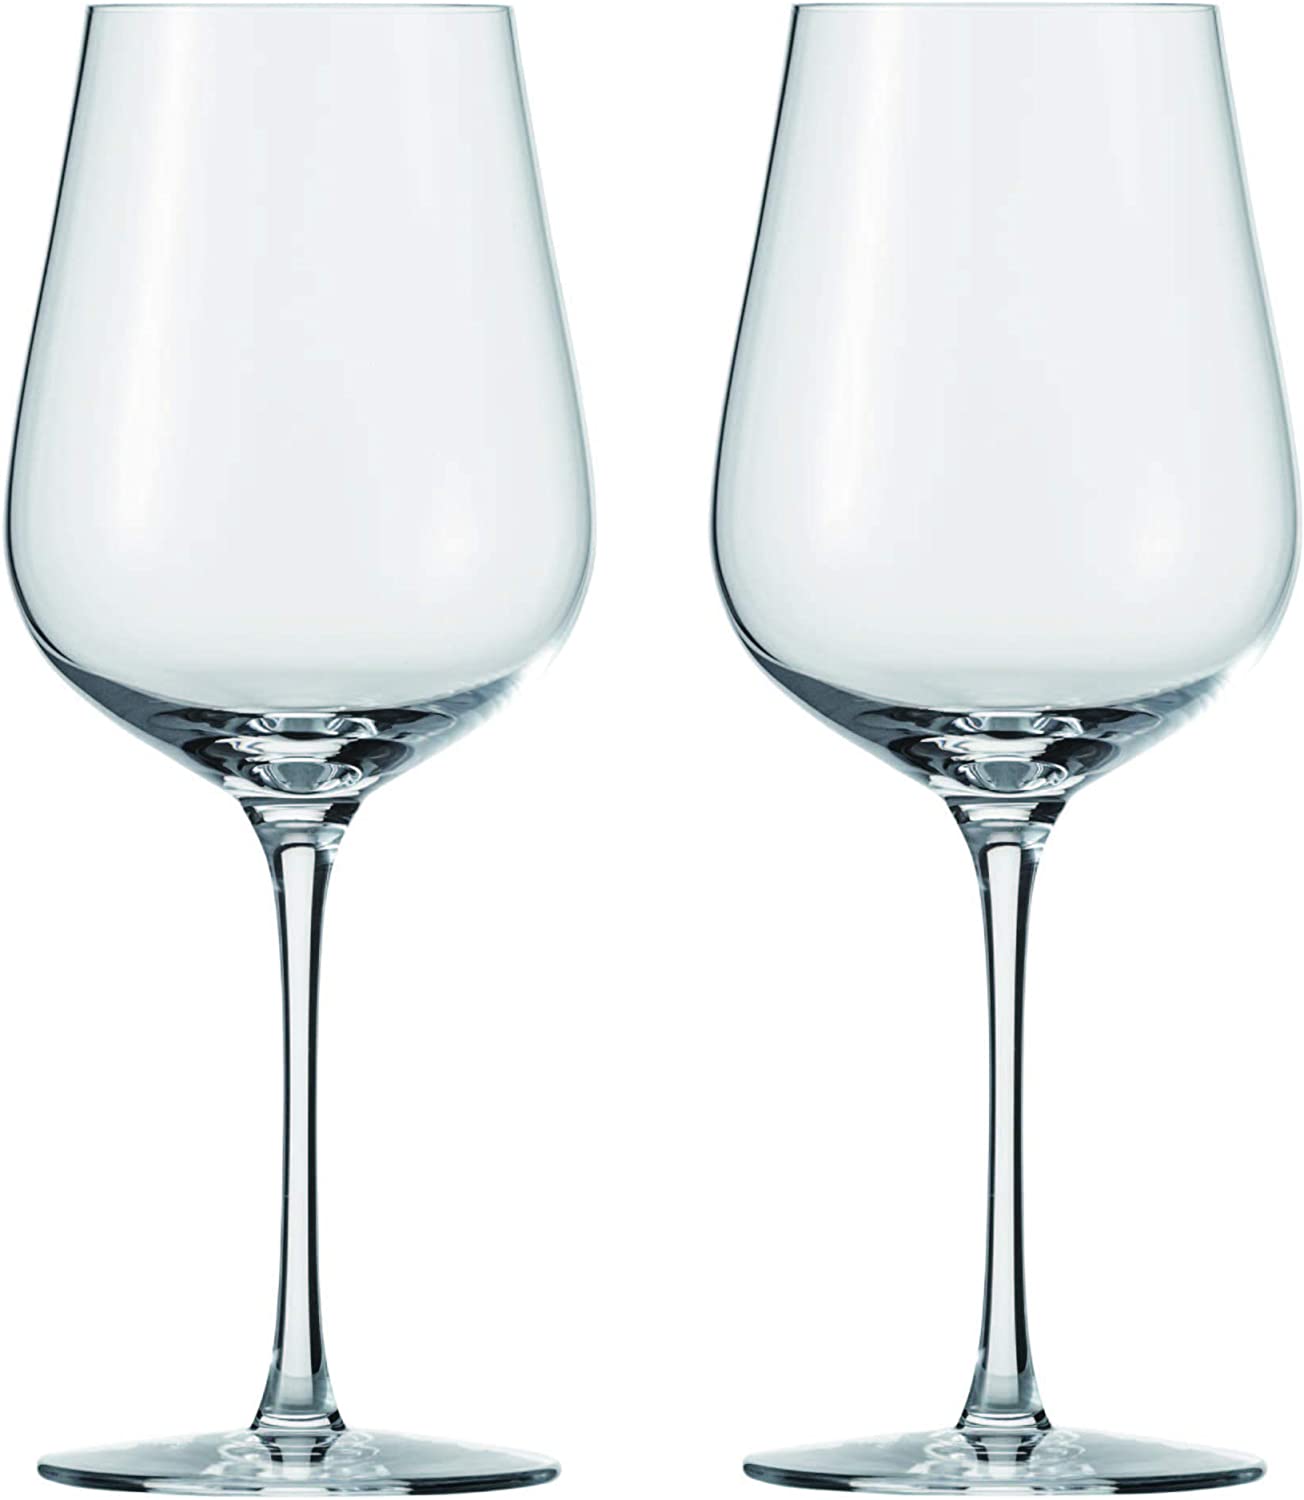 Schott Zwiesel Air Riesling Set of 2 White Wine Glass, Transparent, 7.7 cm, 2 Units